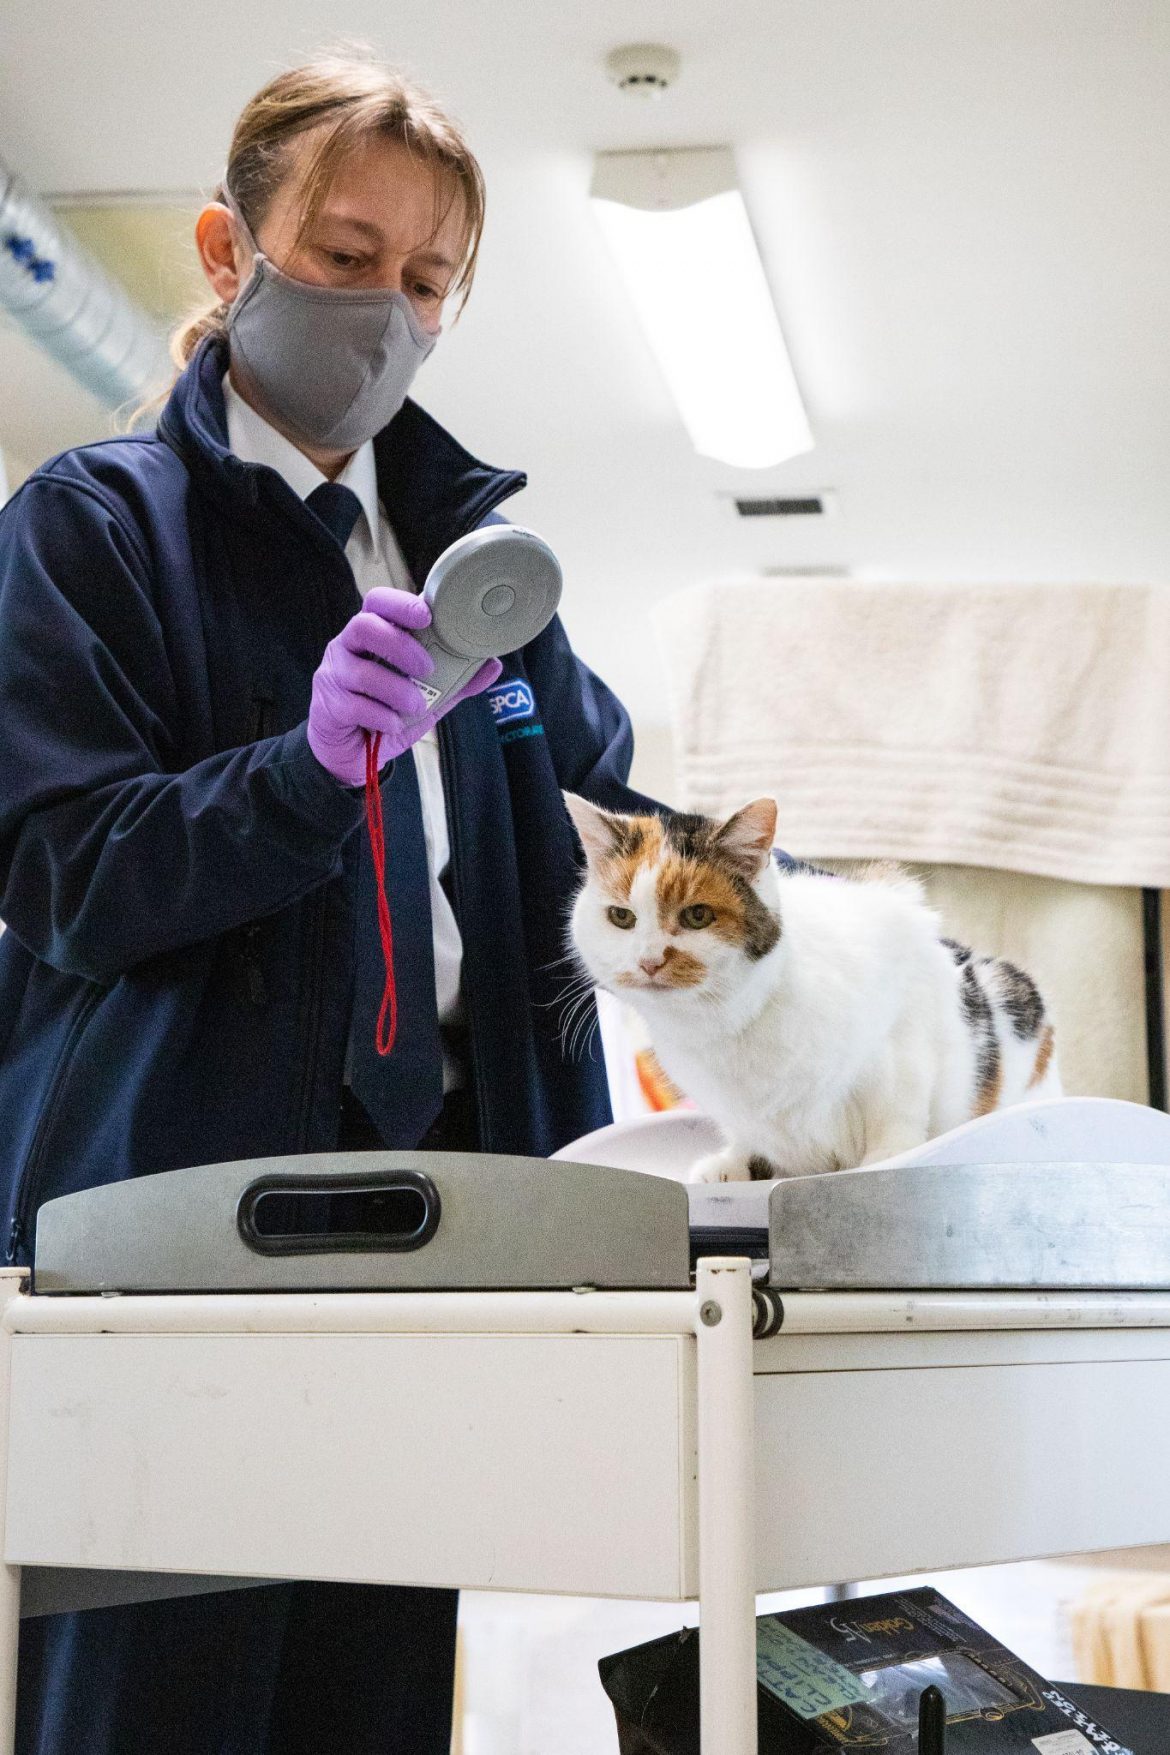 RSPCA Welcomes UK Government Announcement on Compulsory Cat Microchipping in England